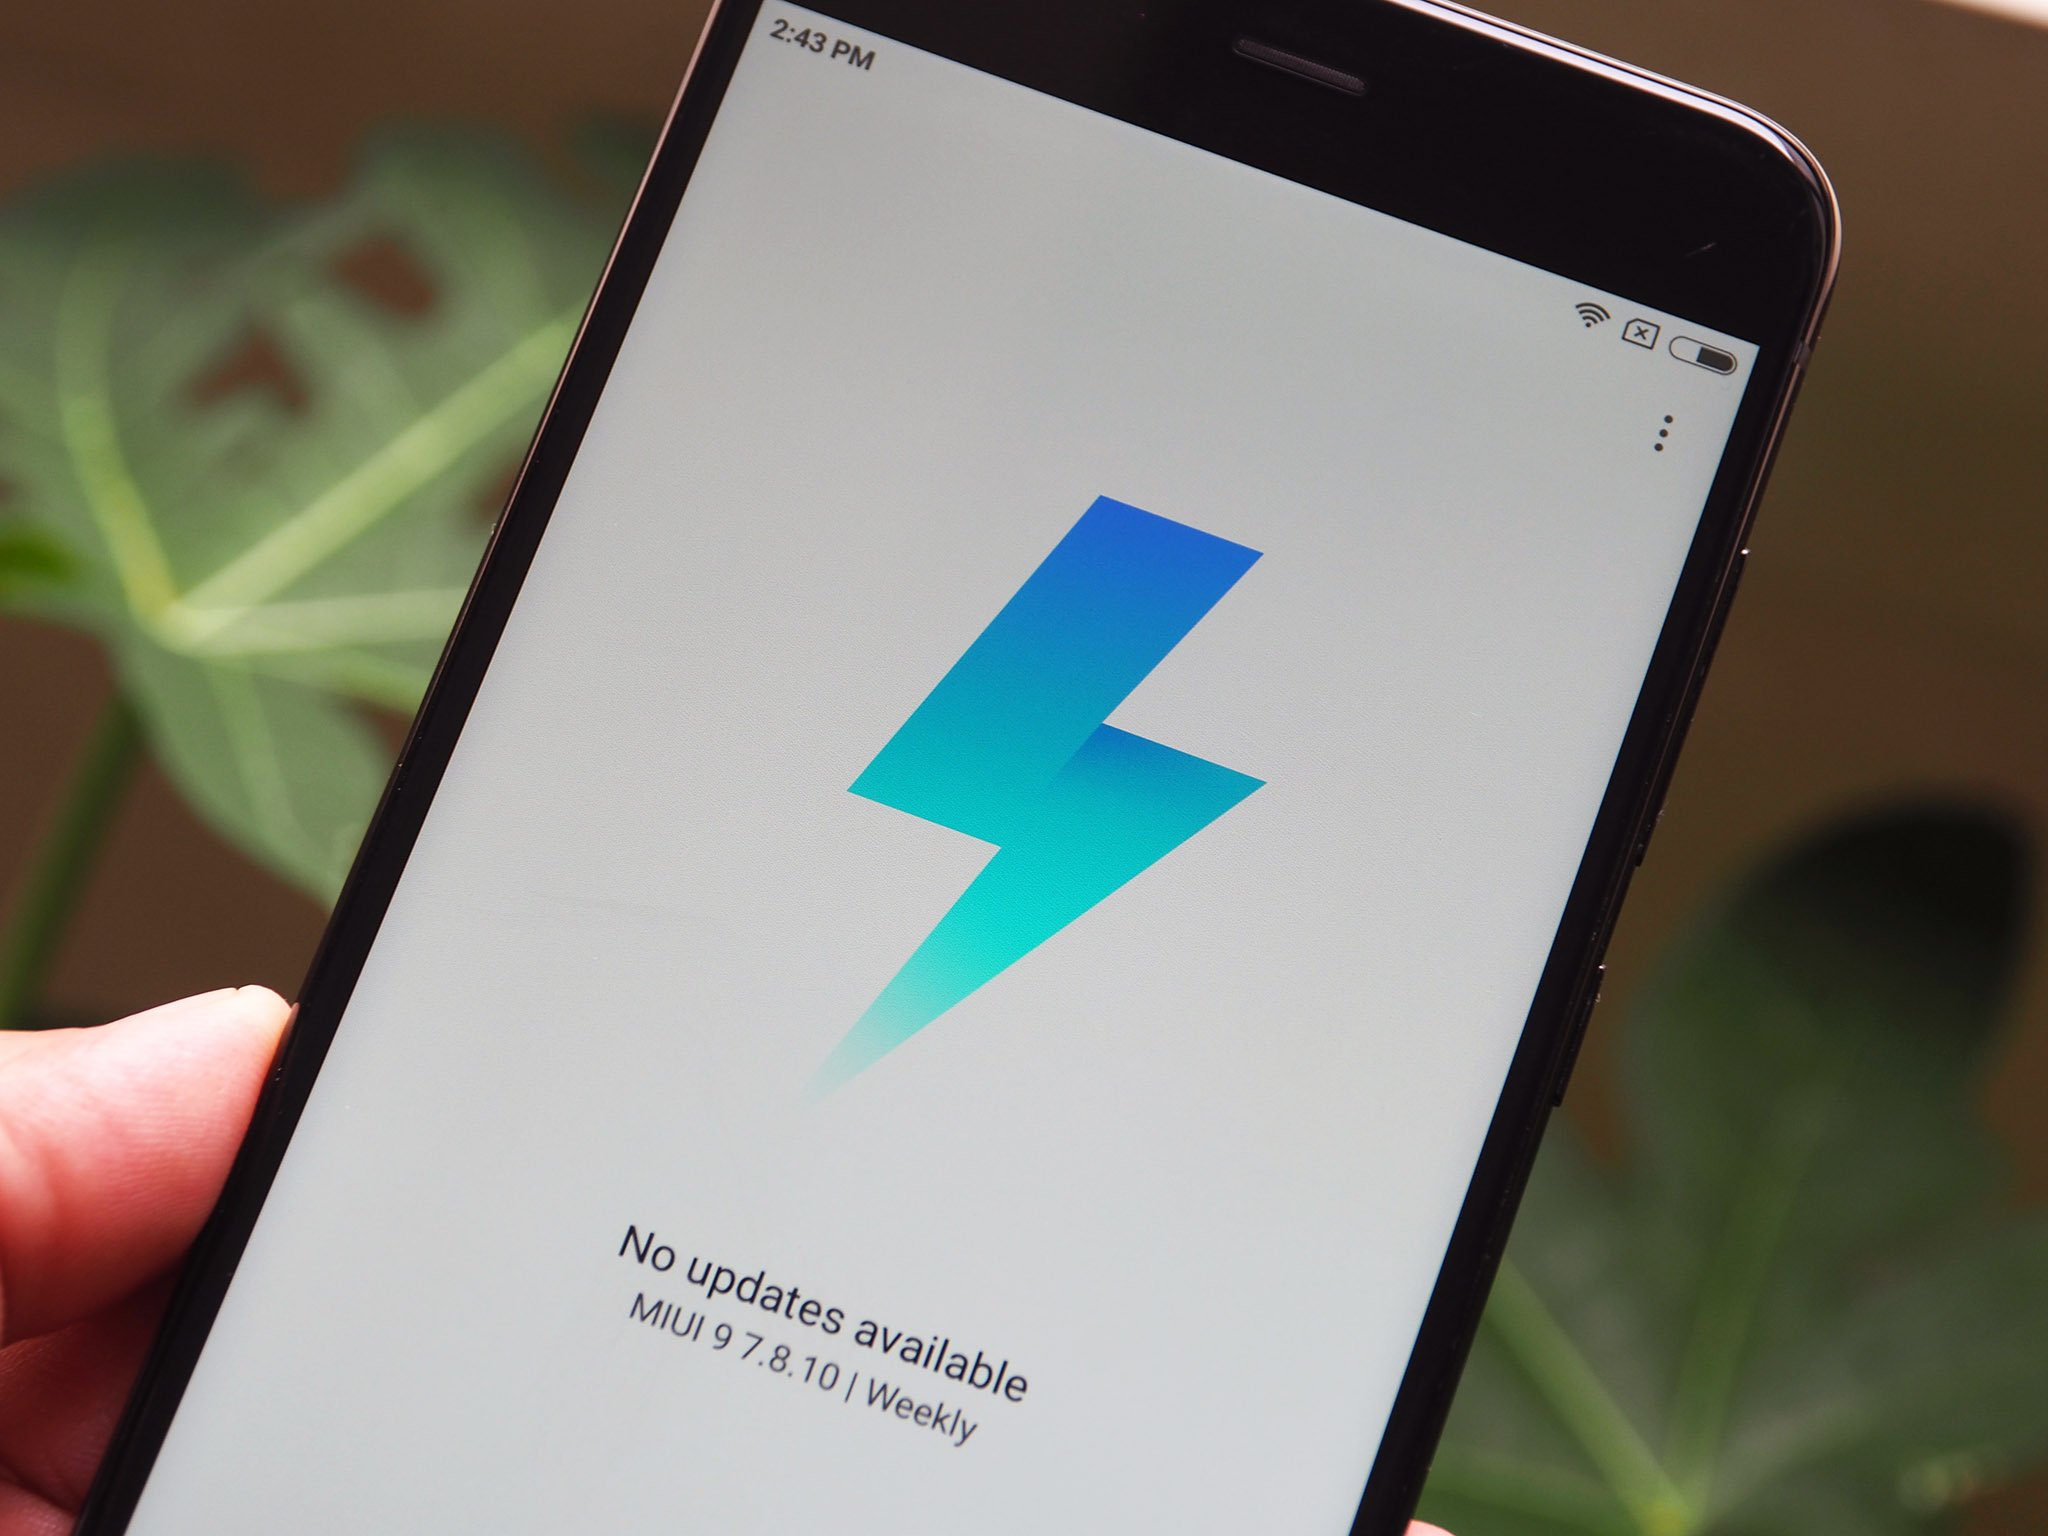 MIUI 9 global beta is now available for Redmi Note 4 and ...